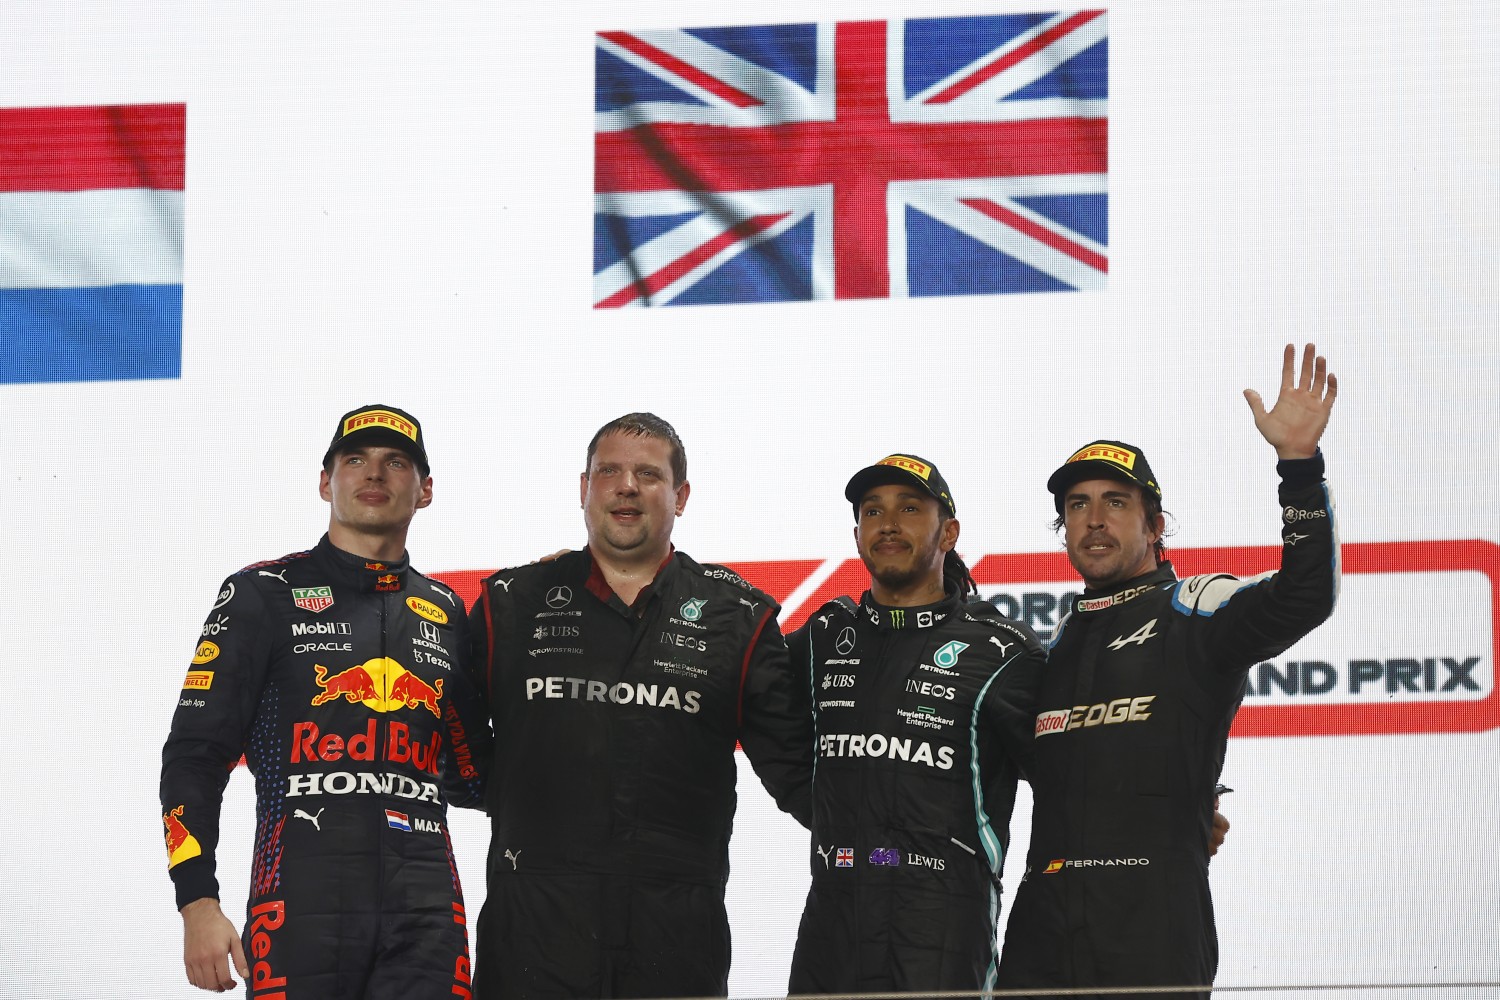 2021 Podium - L to R: Verstappen, Hamilton and Alonso- LAT Images